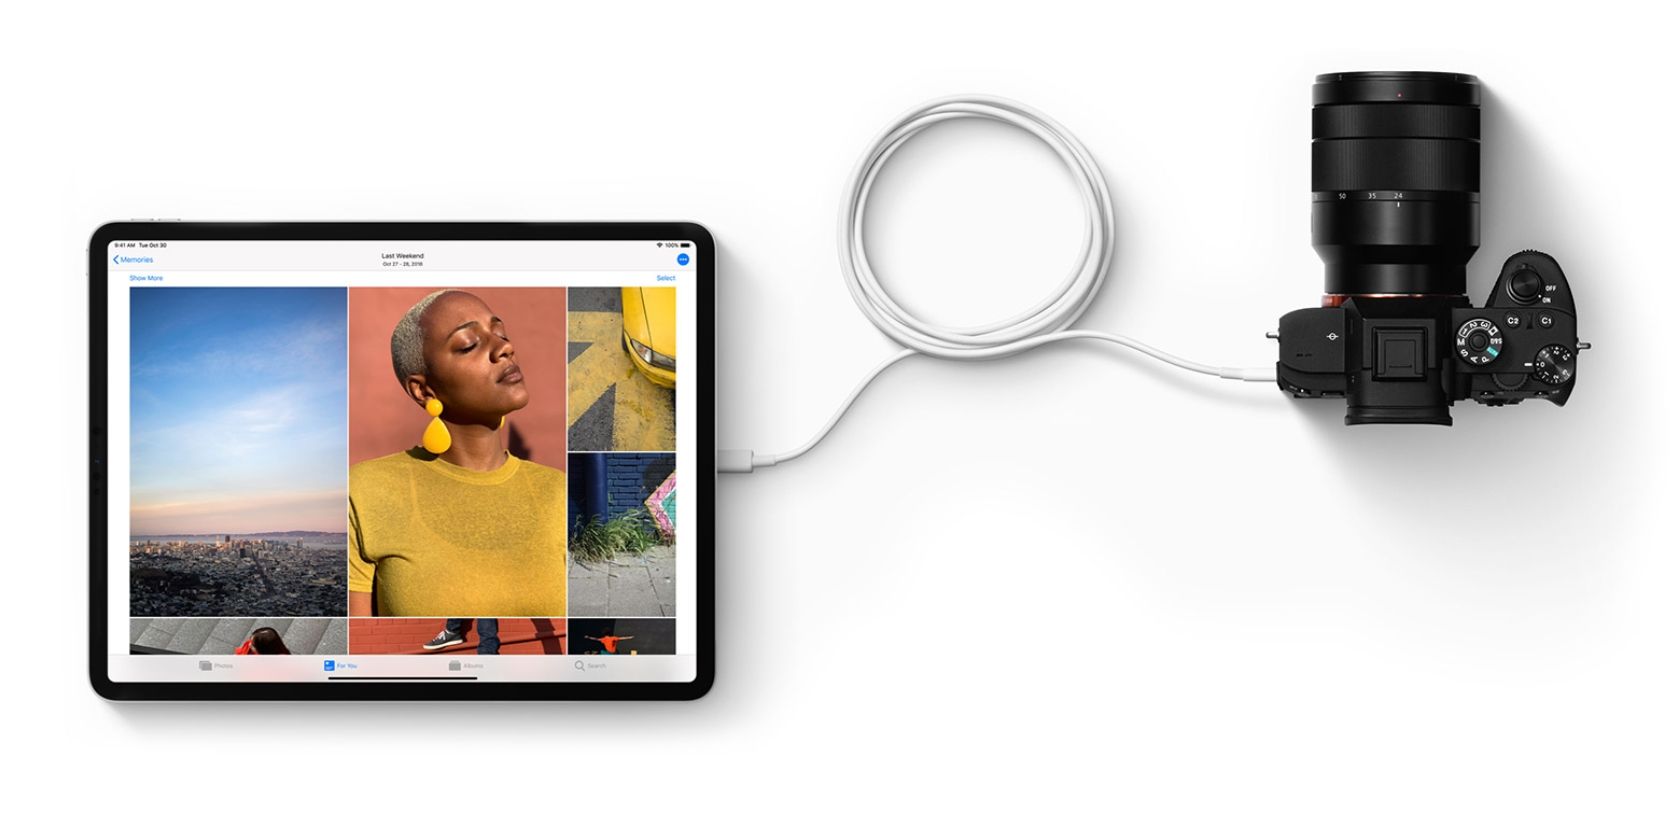 iPad Pro connected to a camera via a USB C Connection